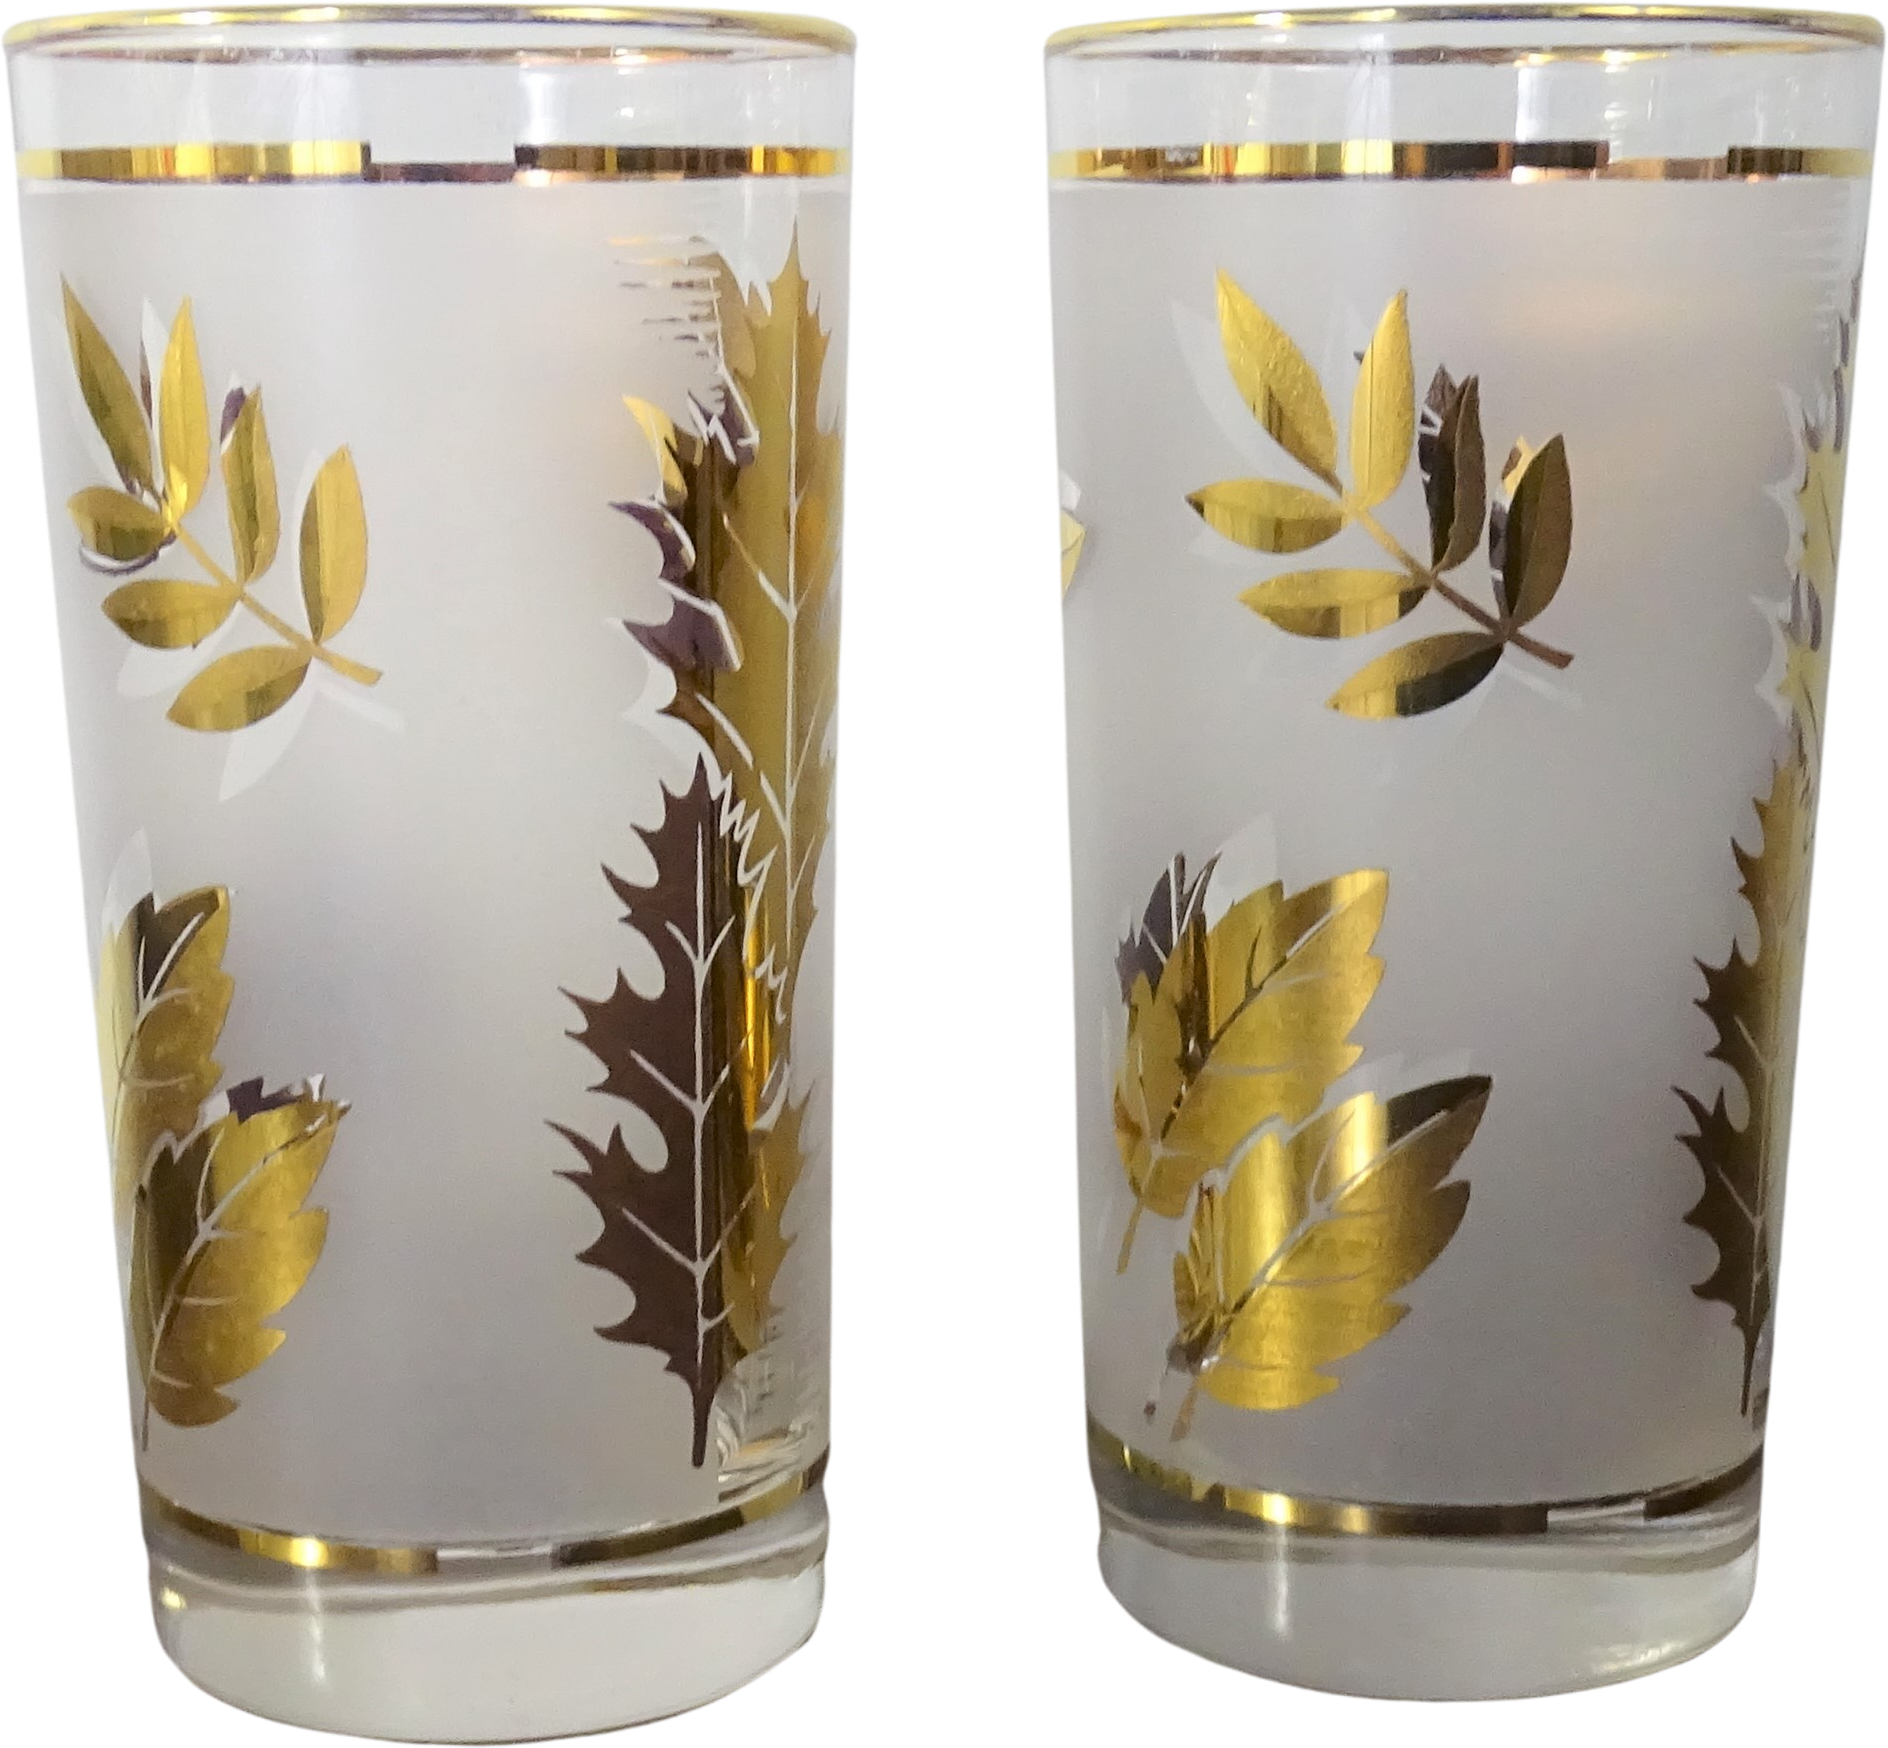 60 vintage Libbey drinking glass designs from the 60s - Click